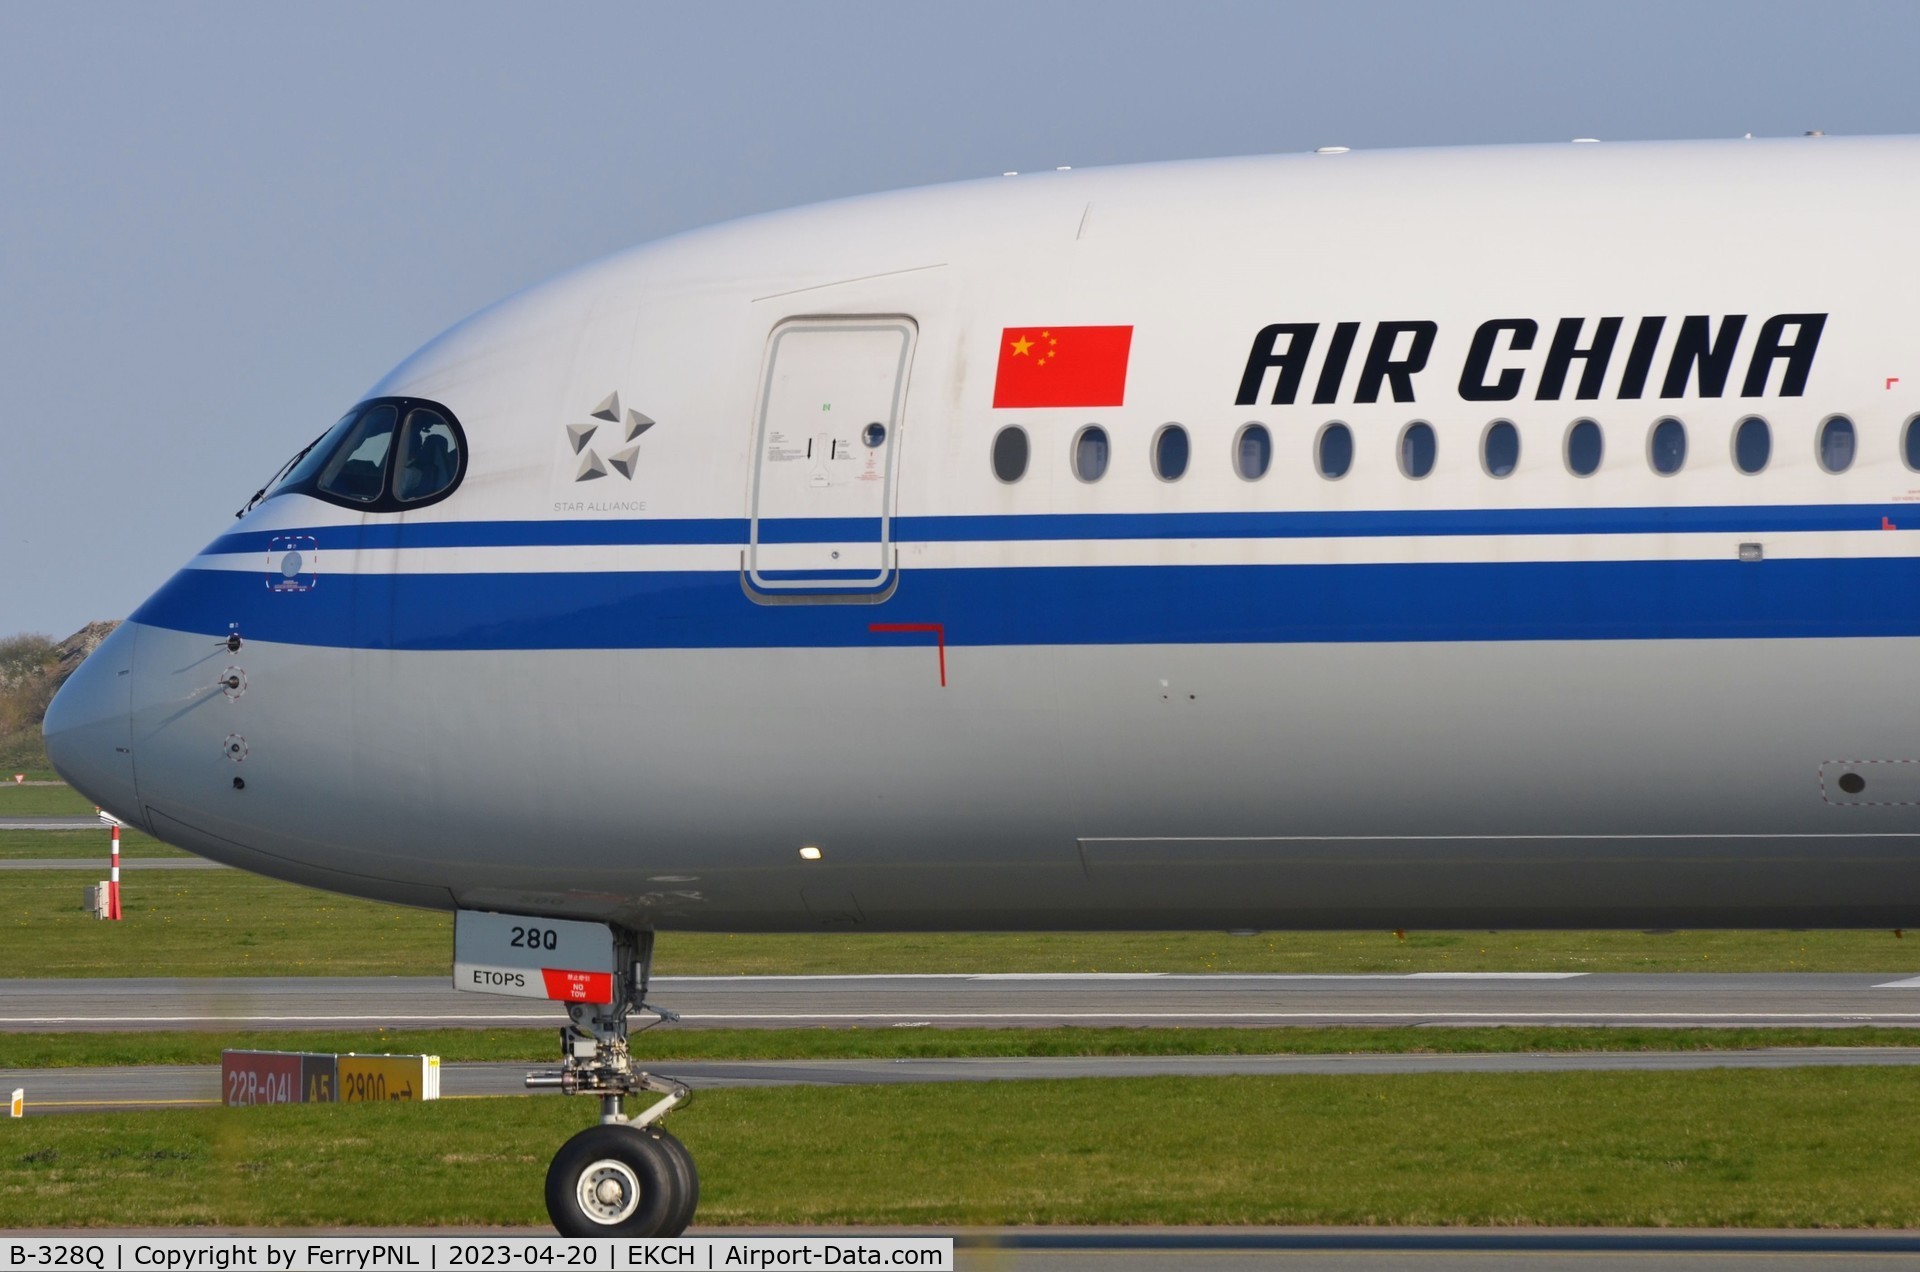 B-328Q, 2021 Airbus A350-941 C/N 537, Air China A359 front section